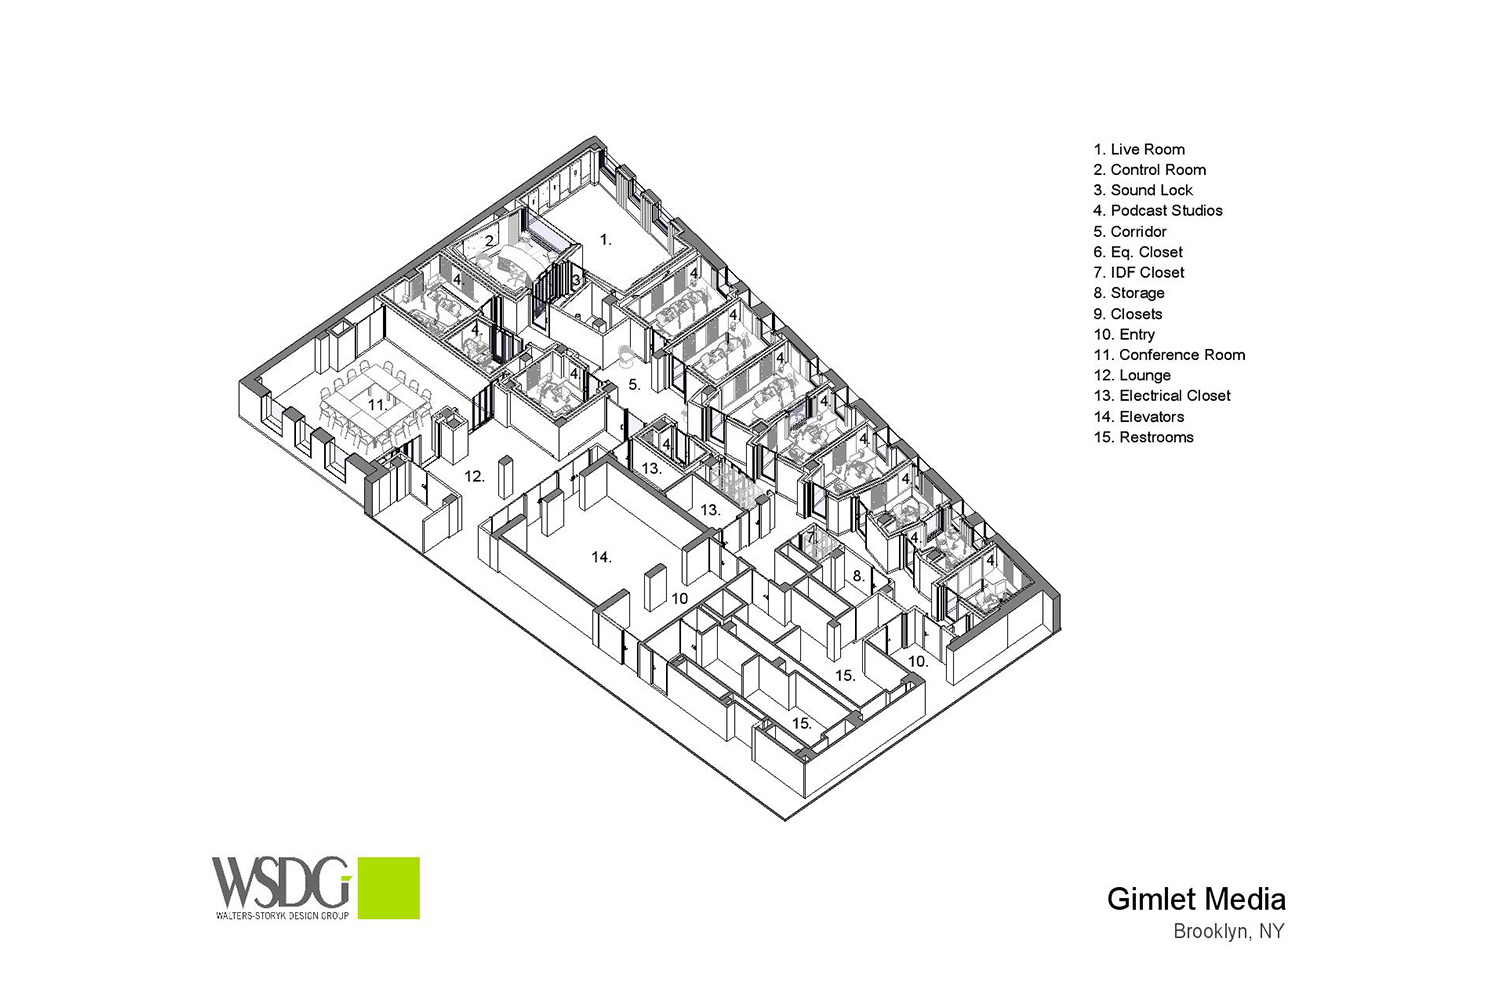 Gimlet Media, the award winning podcast production company is setting the standard in podcast creation studios with its new 28,000 square foot production facility. Designed by the acoustic architectural firm WSDG, it catapults Gimlet’s podcasting operations from a modest studio operation to a commercial-grade. Axonometric View.